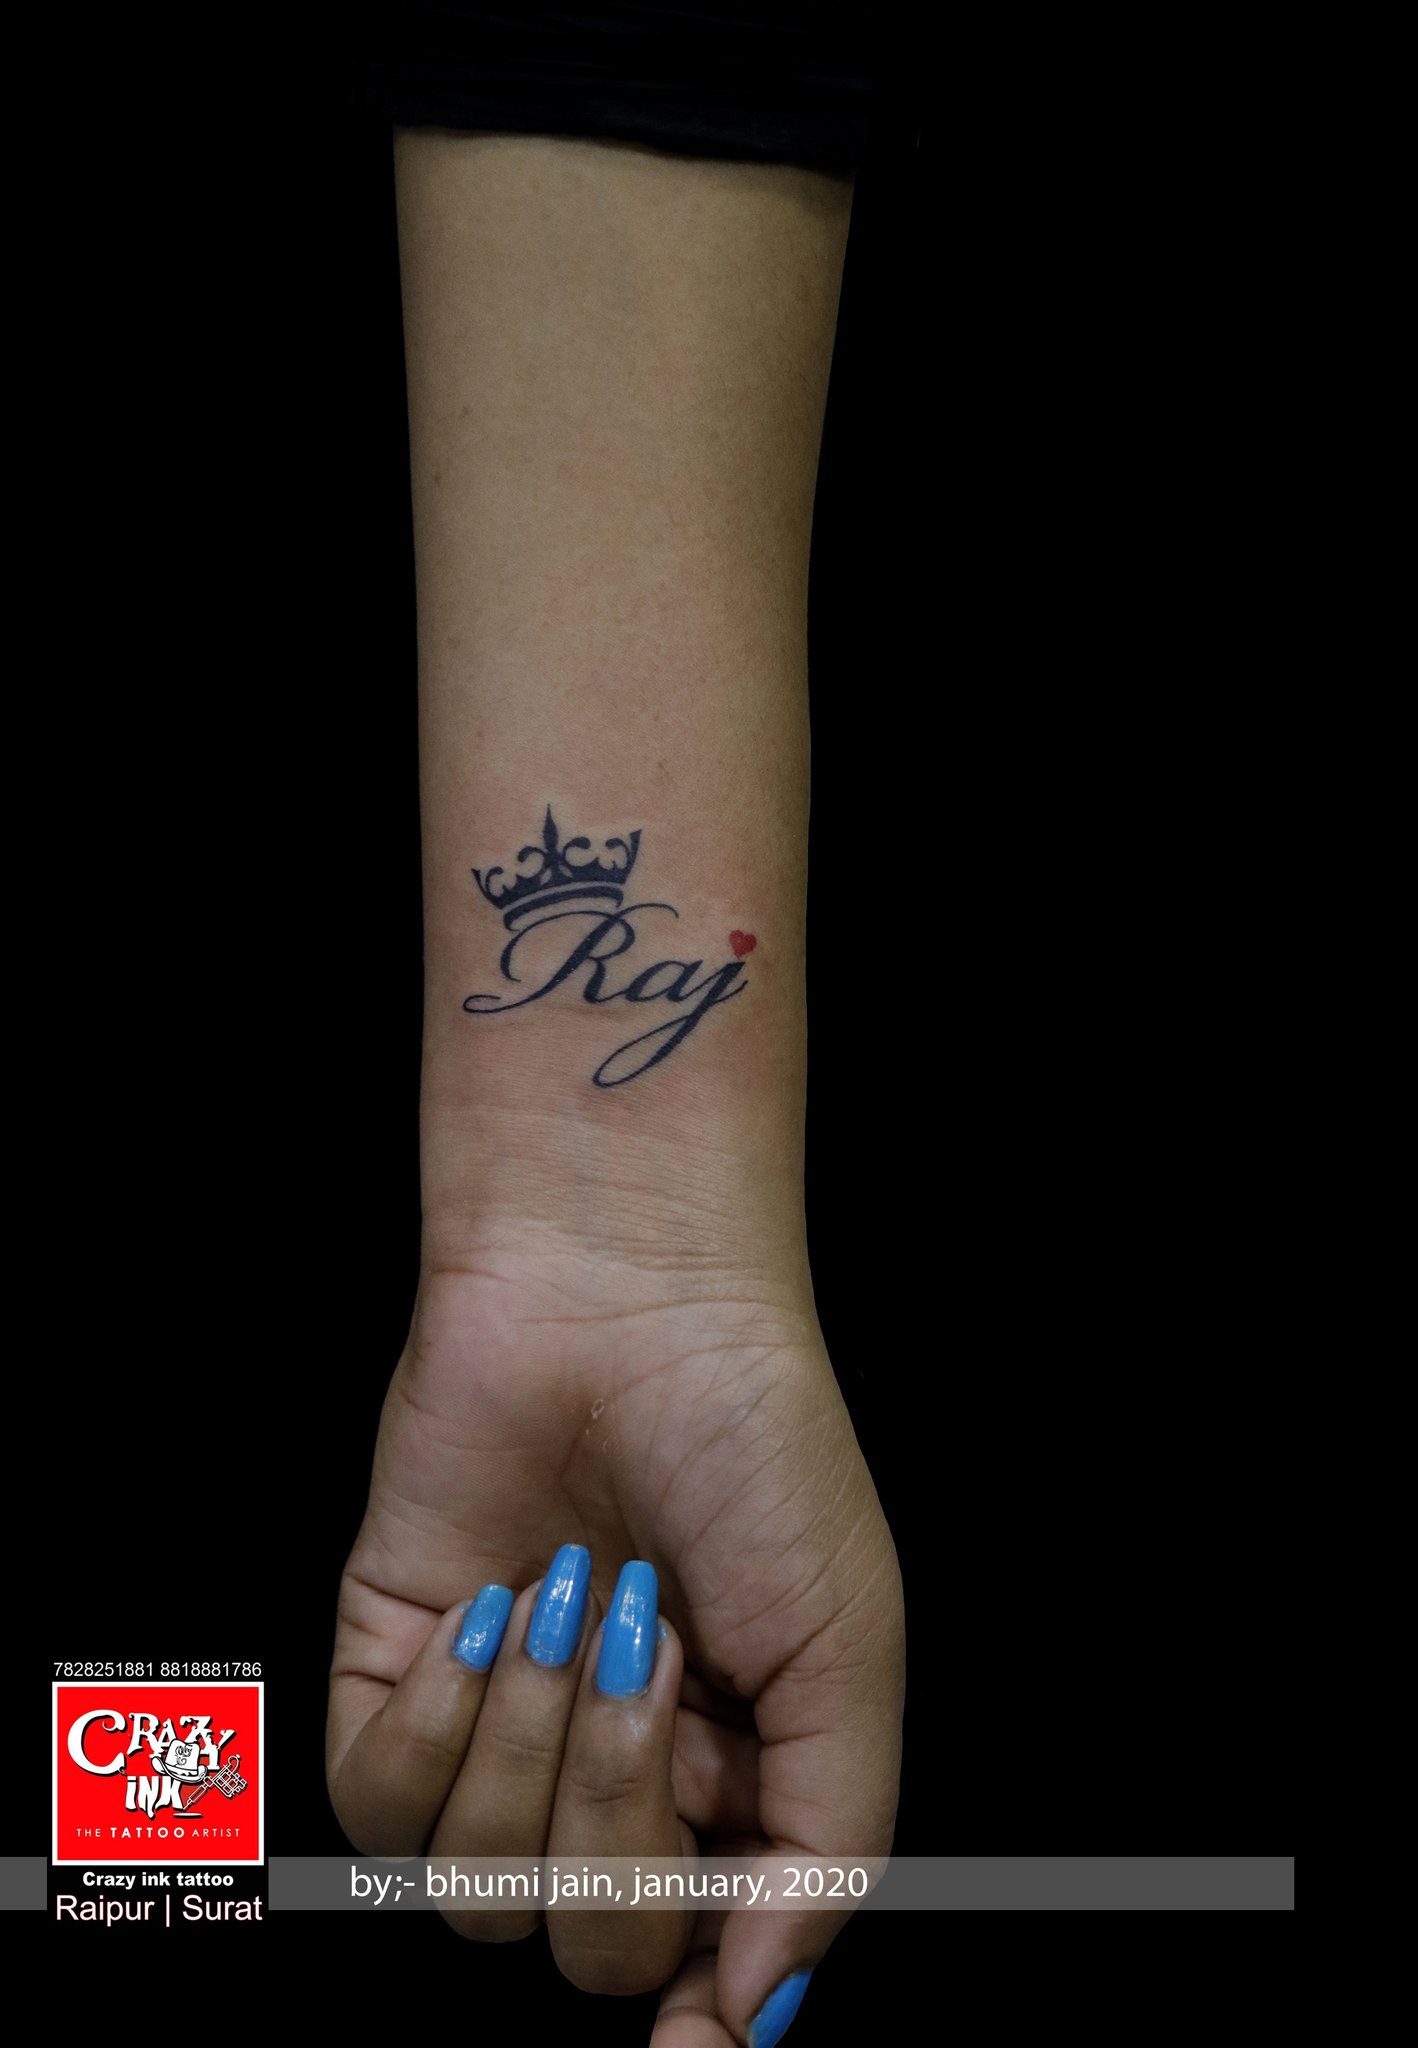 Discover 73+ about rajesh naam ka tattoo unmissable .vn